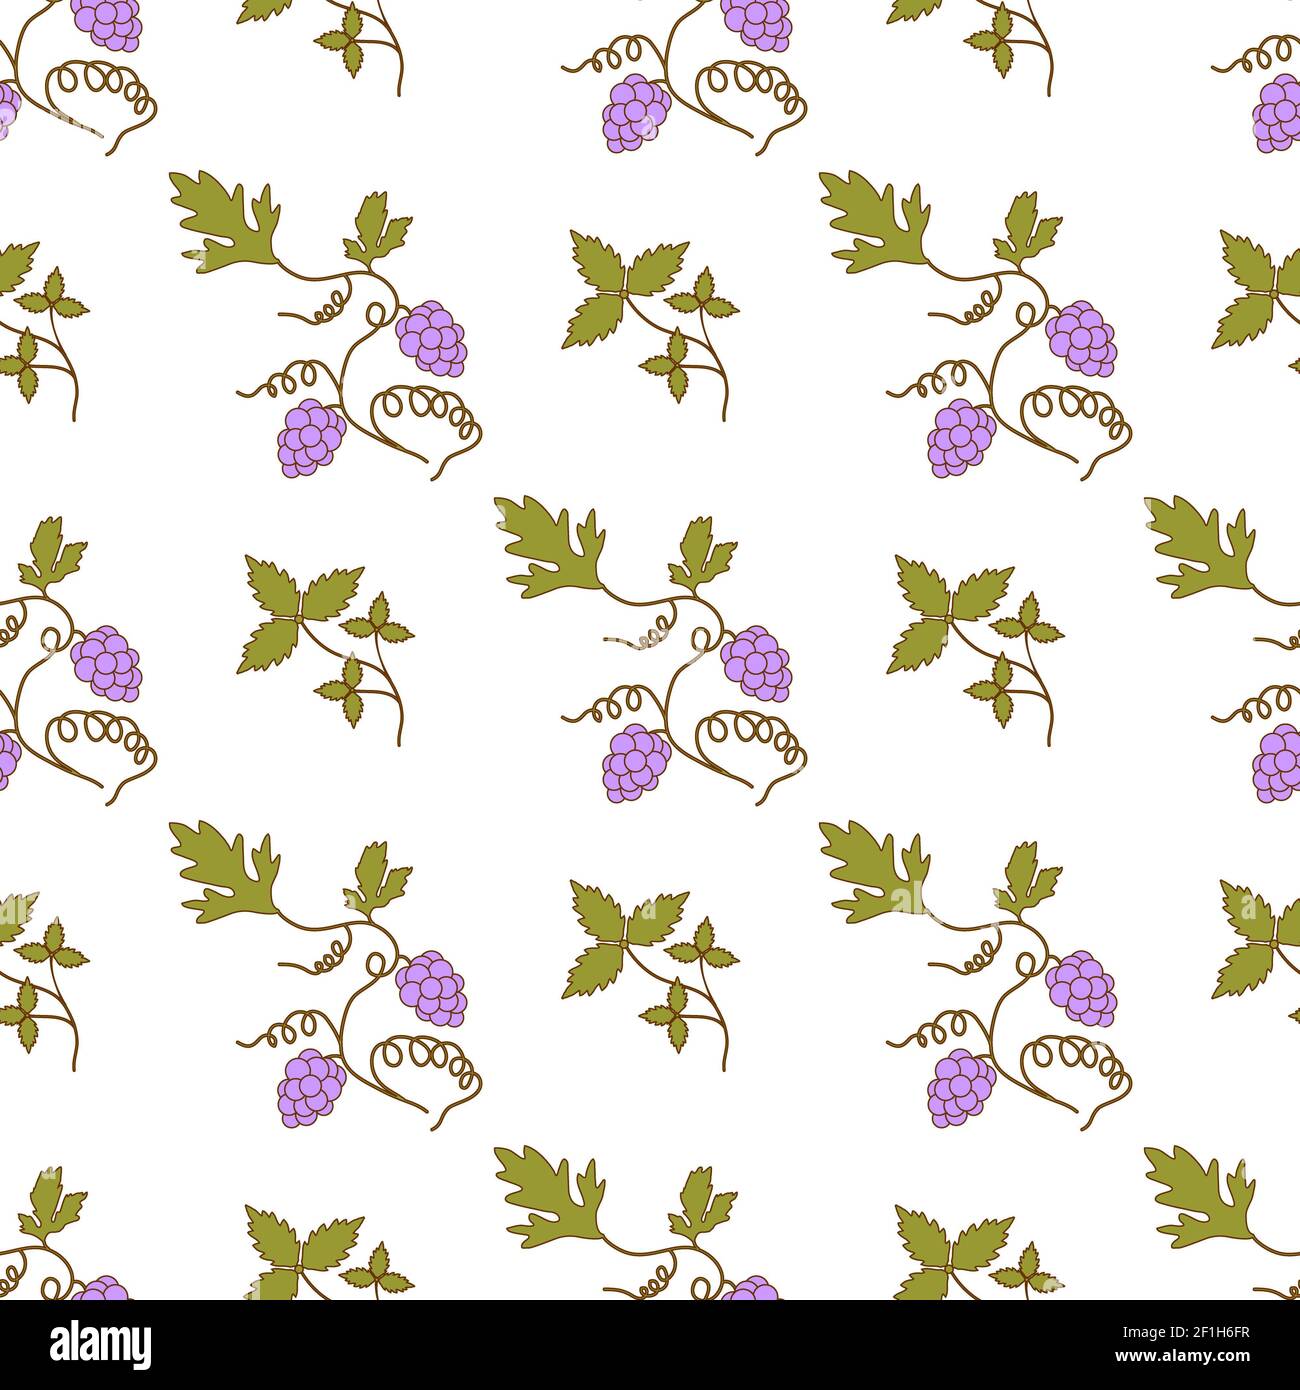 Seamless damask pattern with bunch of grapes Stock Photo